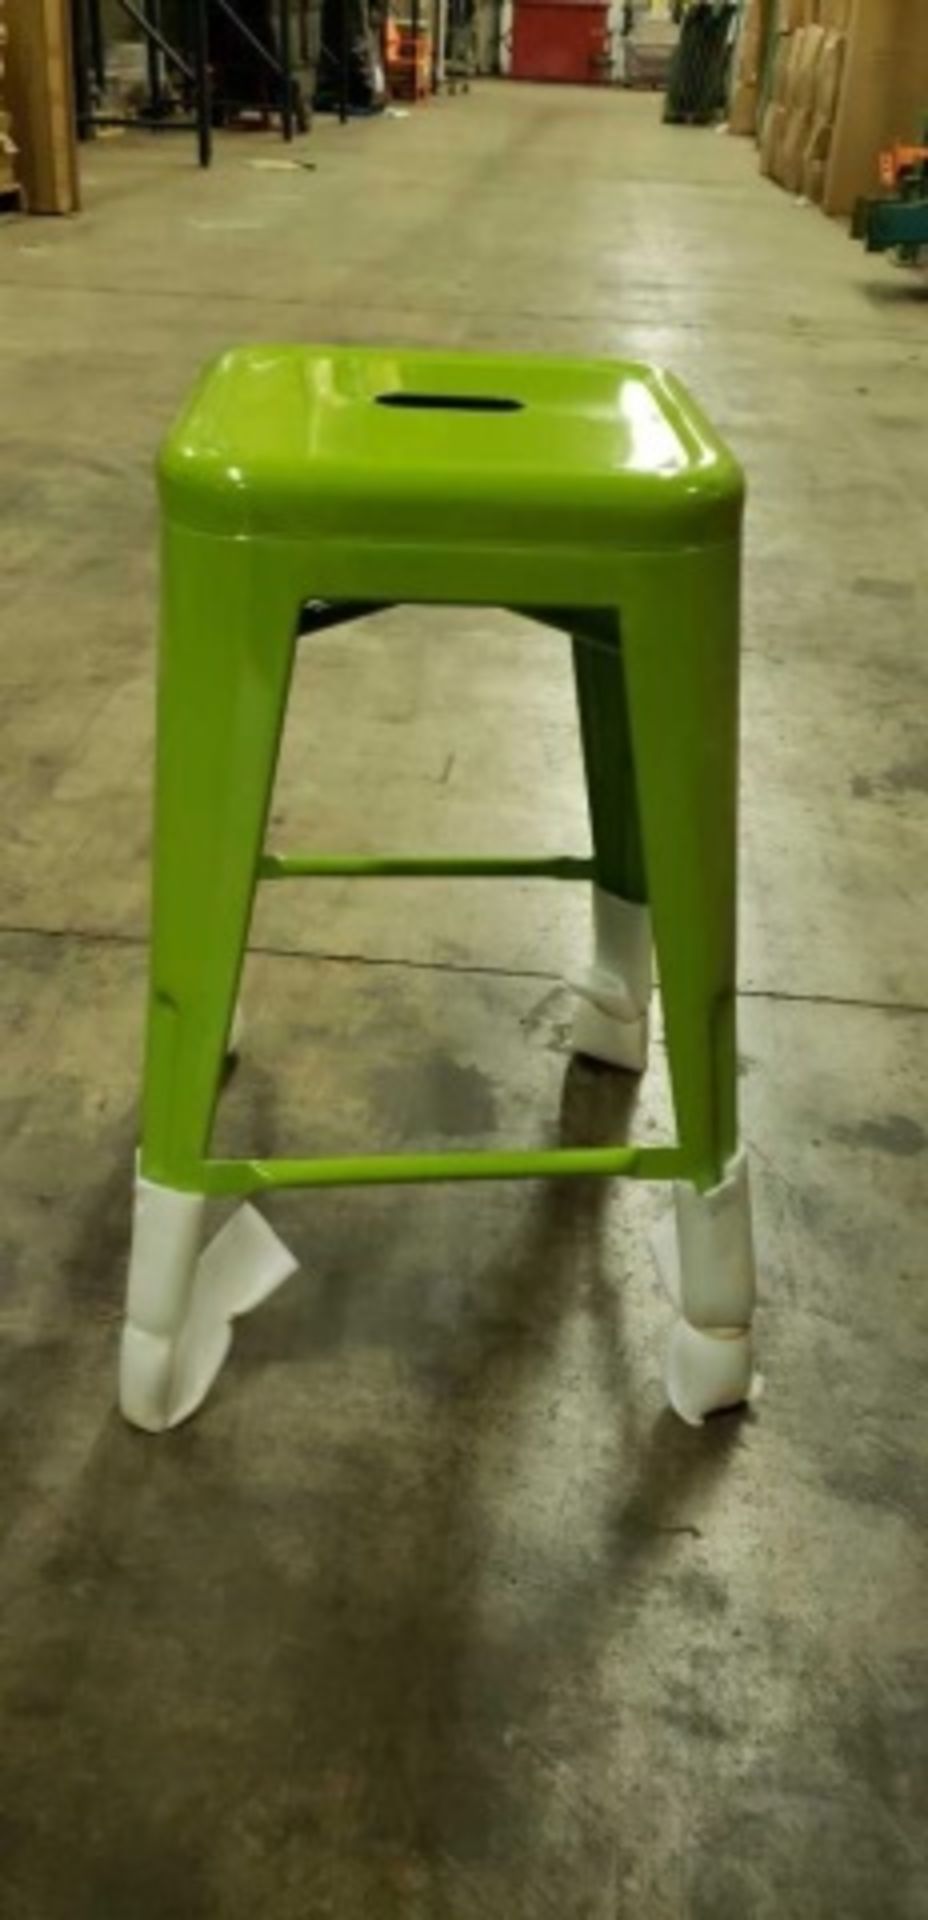 Manhattan Counter Height, Bar Stool - Green. 4 per box, 7 boxes, 24 total. - Image 2 of 5